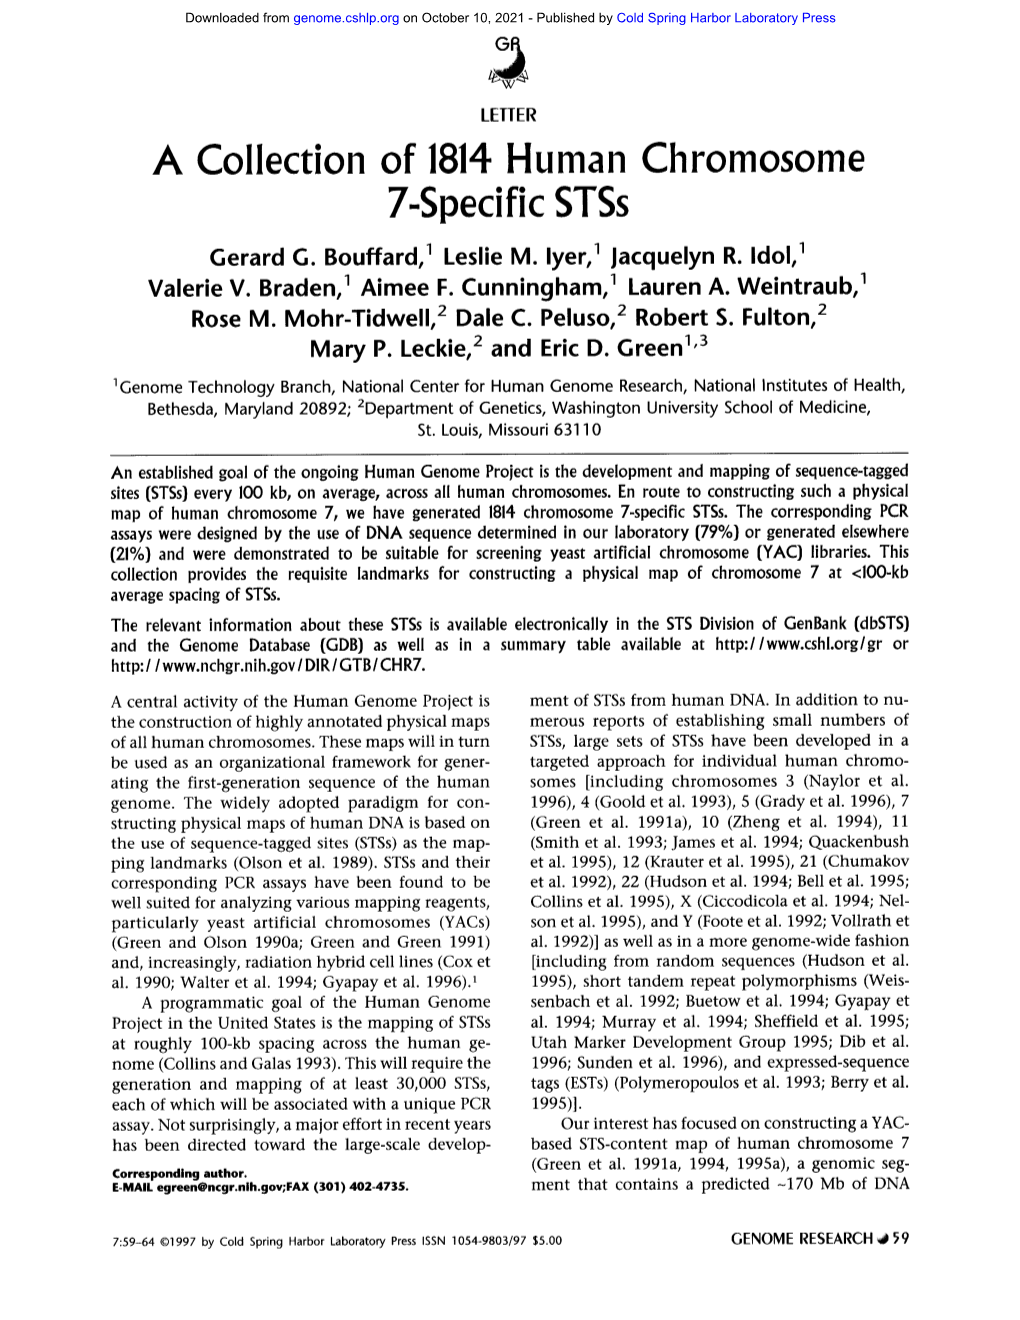 A Collection of 1814 Human Chromosome 7-Specific Stss